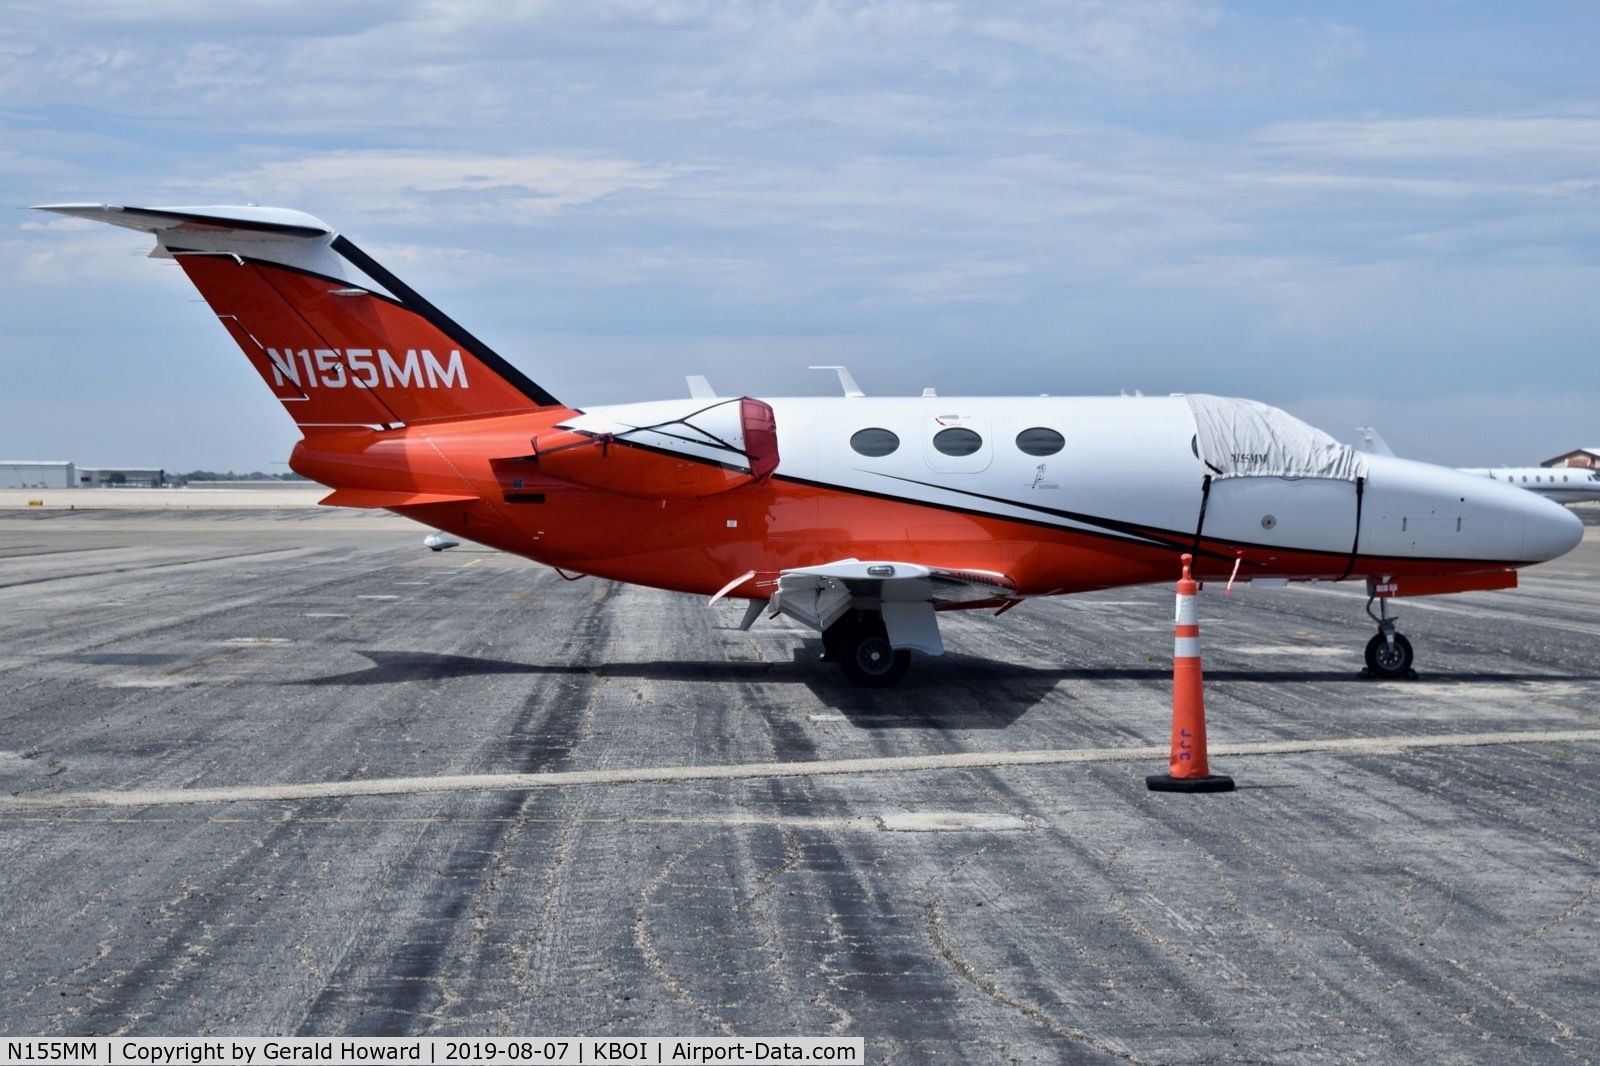 N155MM, 2014 Cessna 510 Citation Mustang C/N 510-0452, Parked on the north GA ramp.